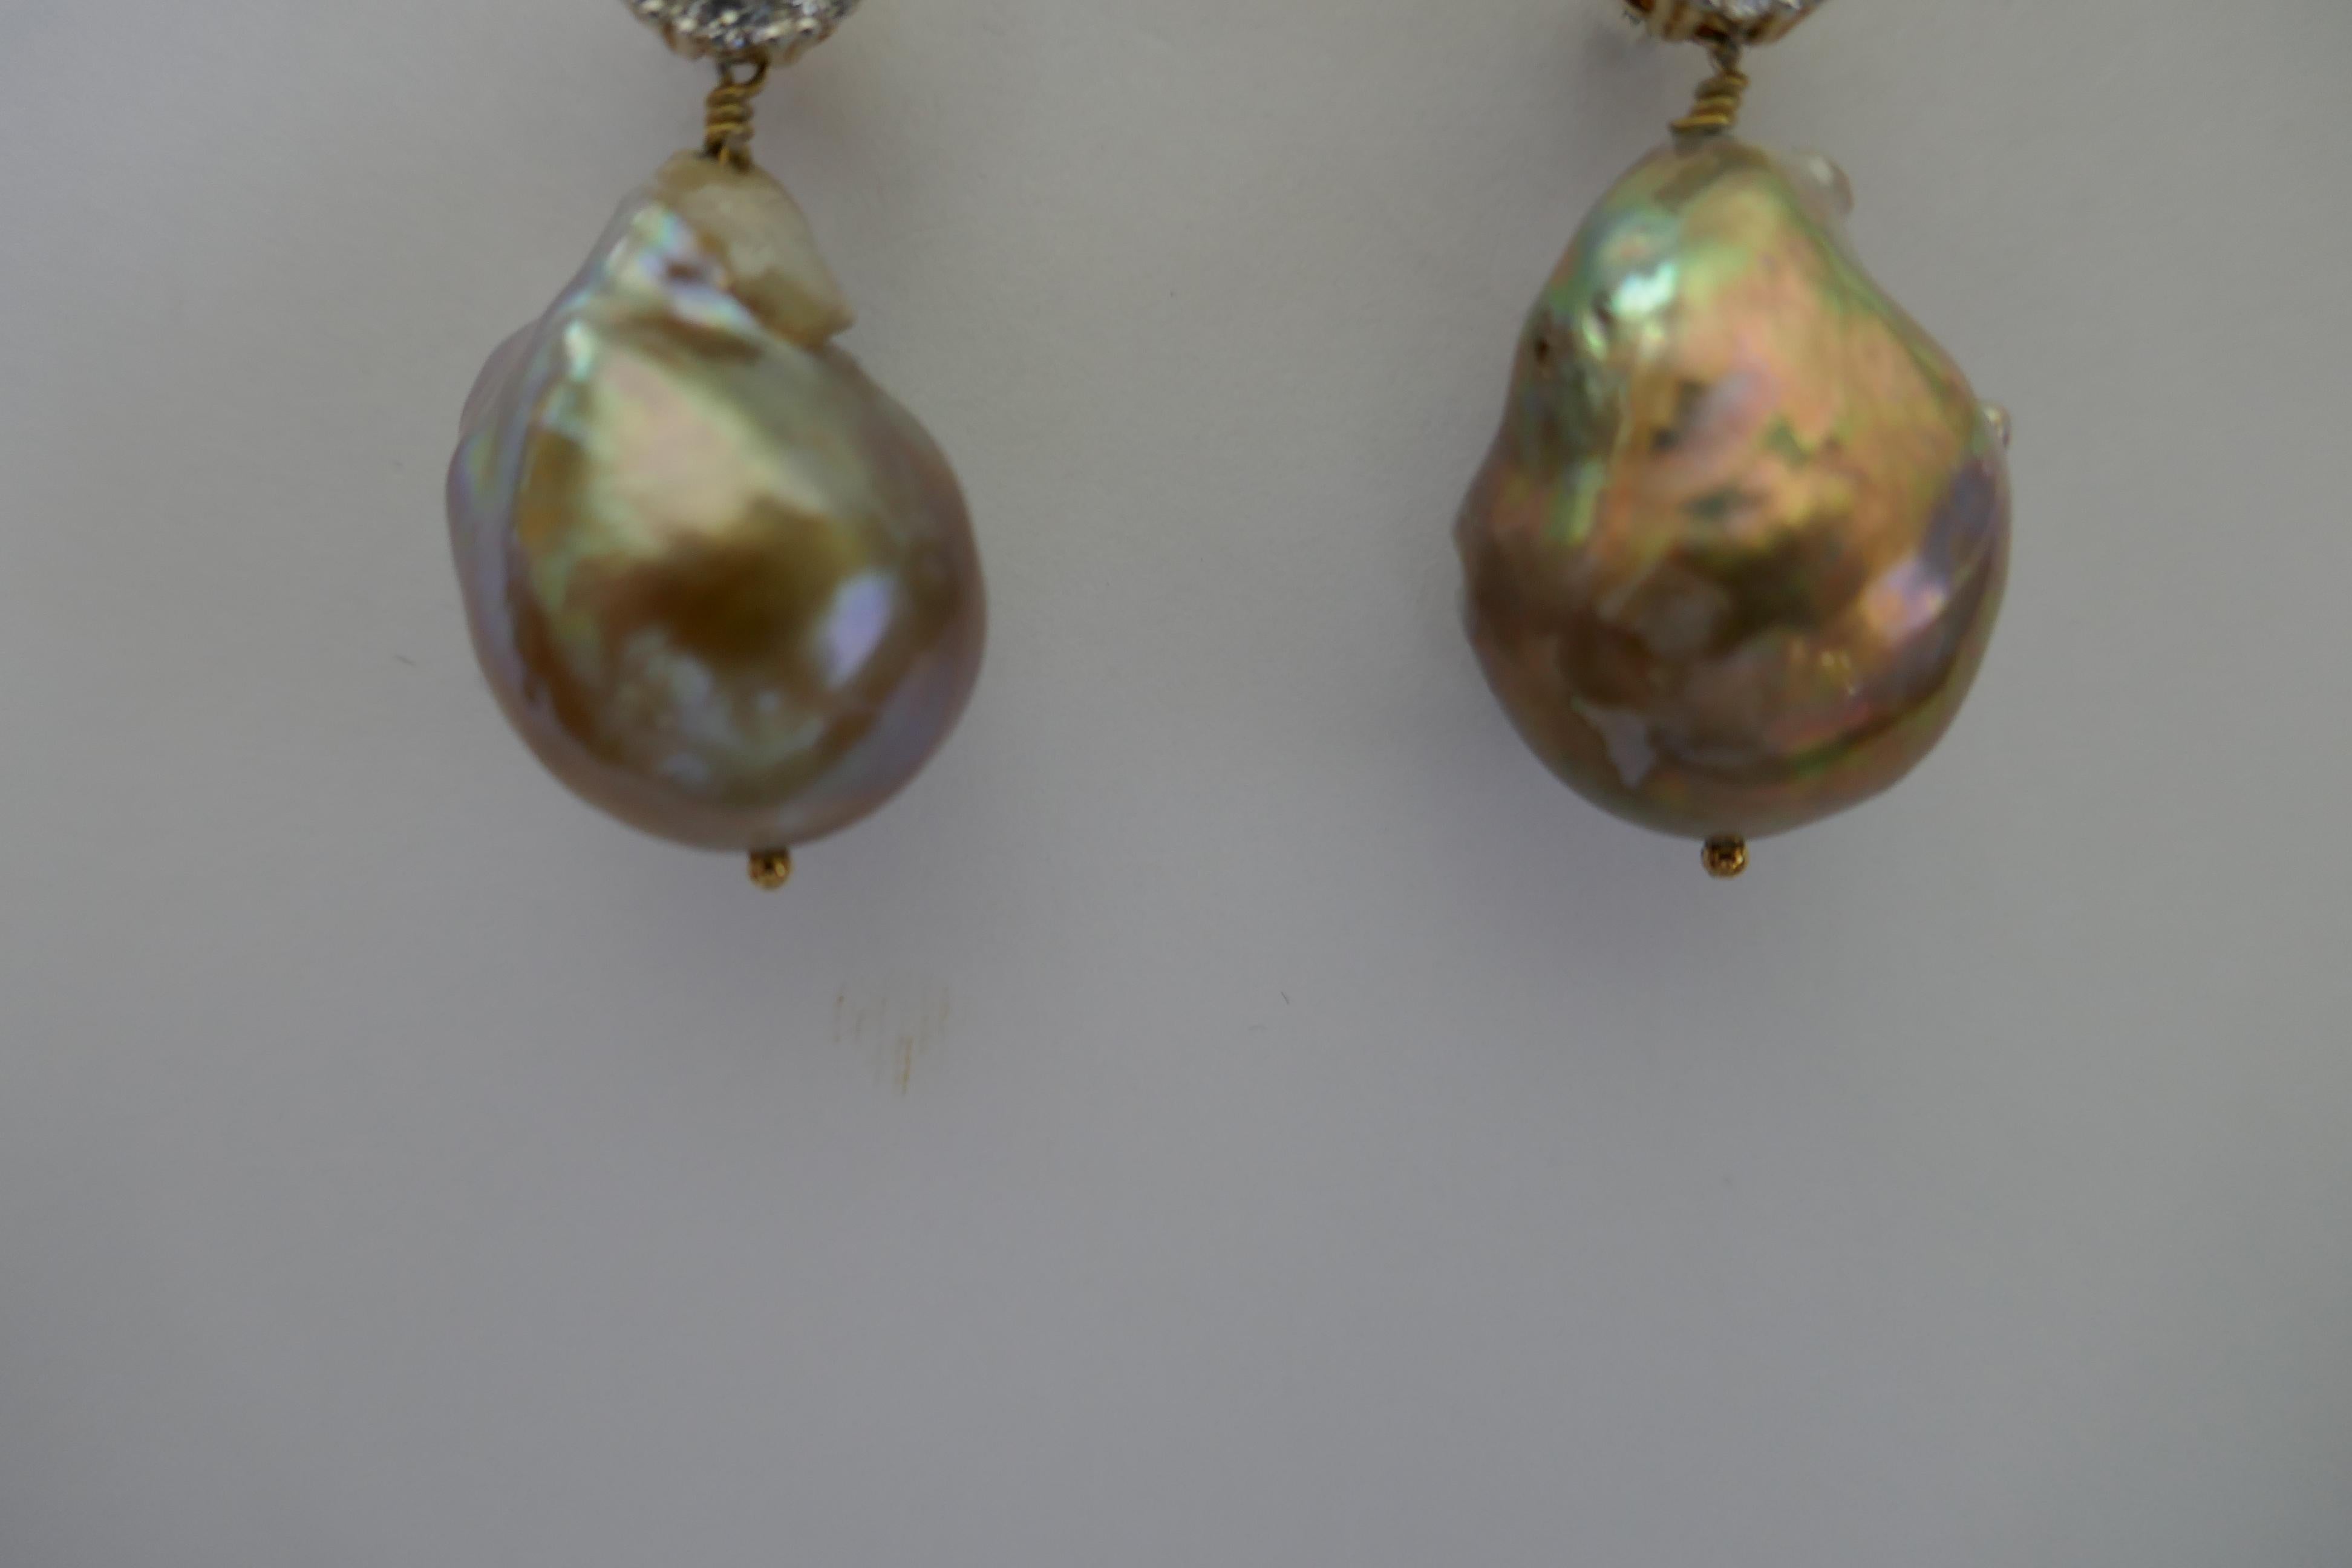 The earrings have a baroque cultured pearls in golden tones as seen in the picture. The size of the pearls is approximately  16mm  x 24mm  The post are screw back but rubber backs may be used. The earrings are 1 3/8  inches long. They look beautiful